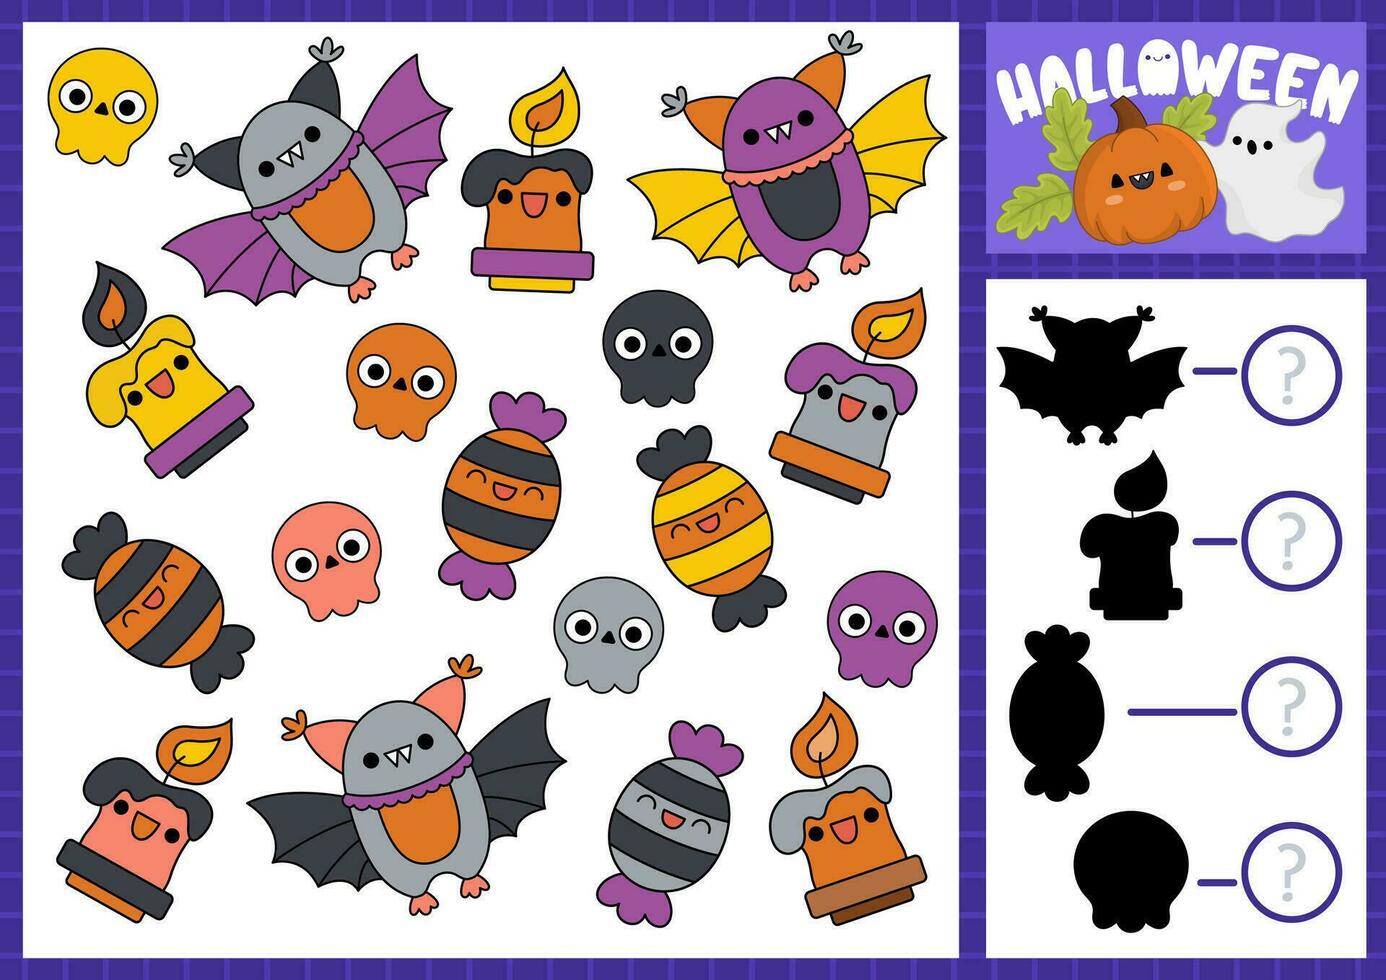 Halloween I spy and shadow match game for kids. Searching and counting activity with cute kawaii holiday symbols. Scary autumn printable worksheet for preschool children vector